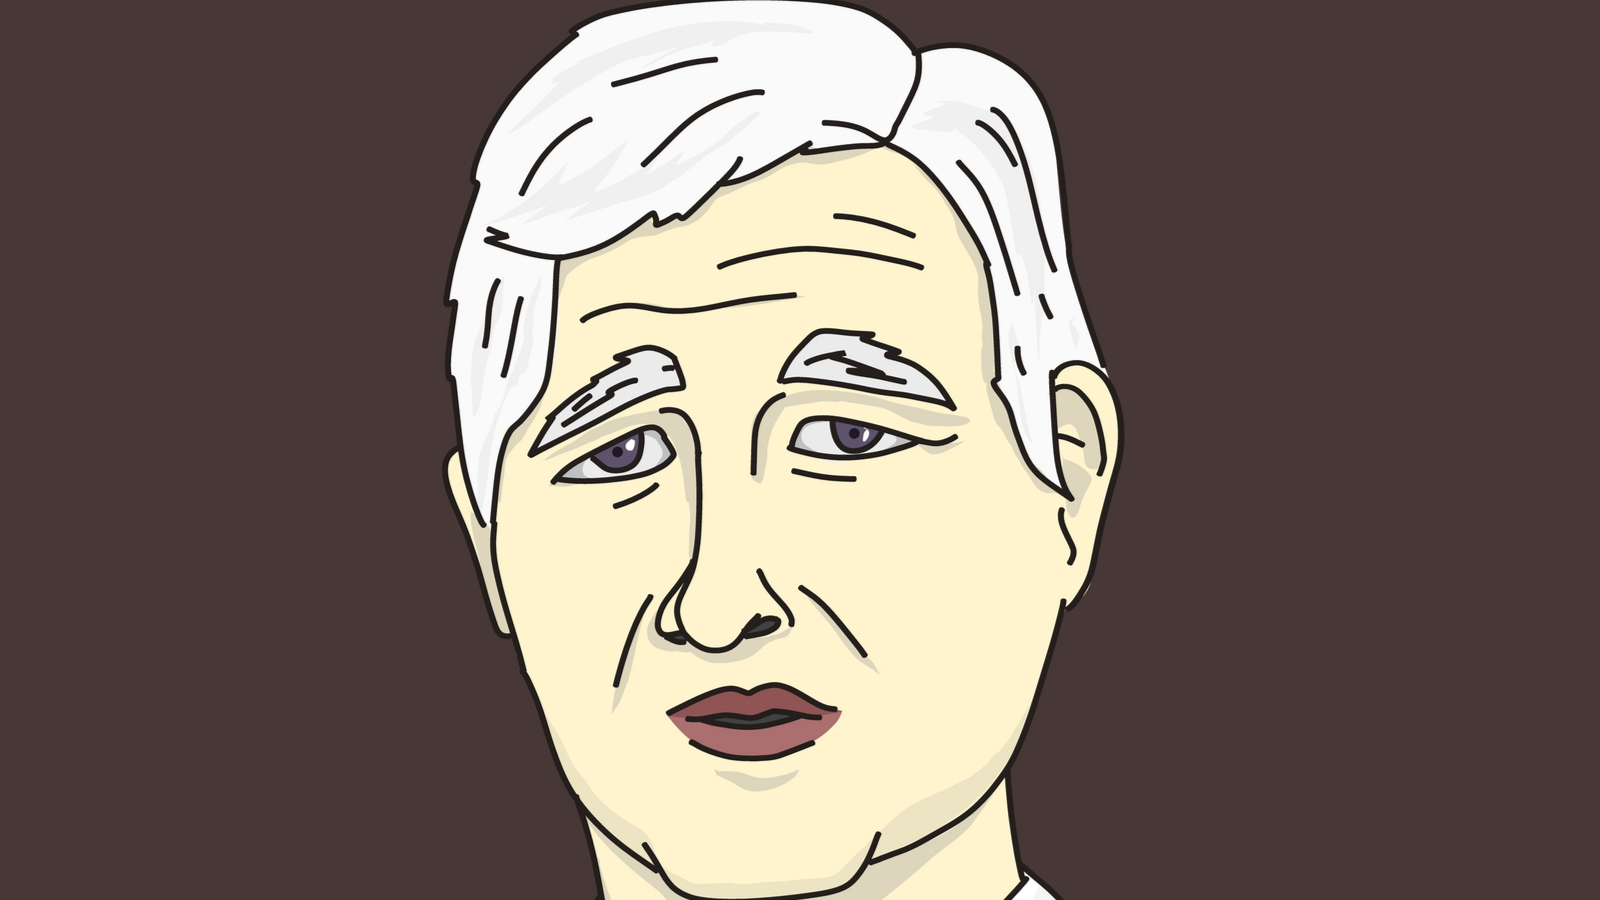 Illustration of Jamie Dimon, CEO of JP Morgan Chase. JPM stock.